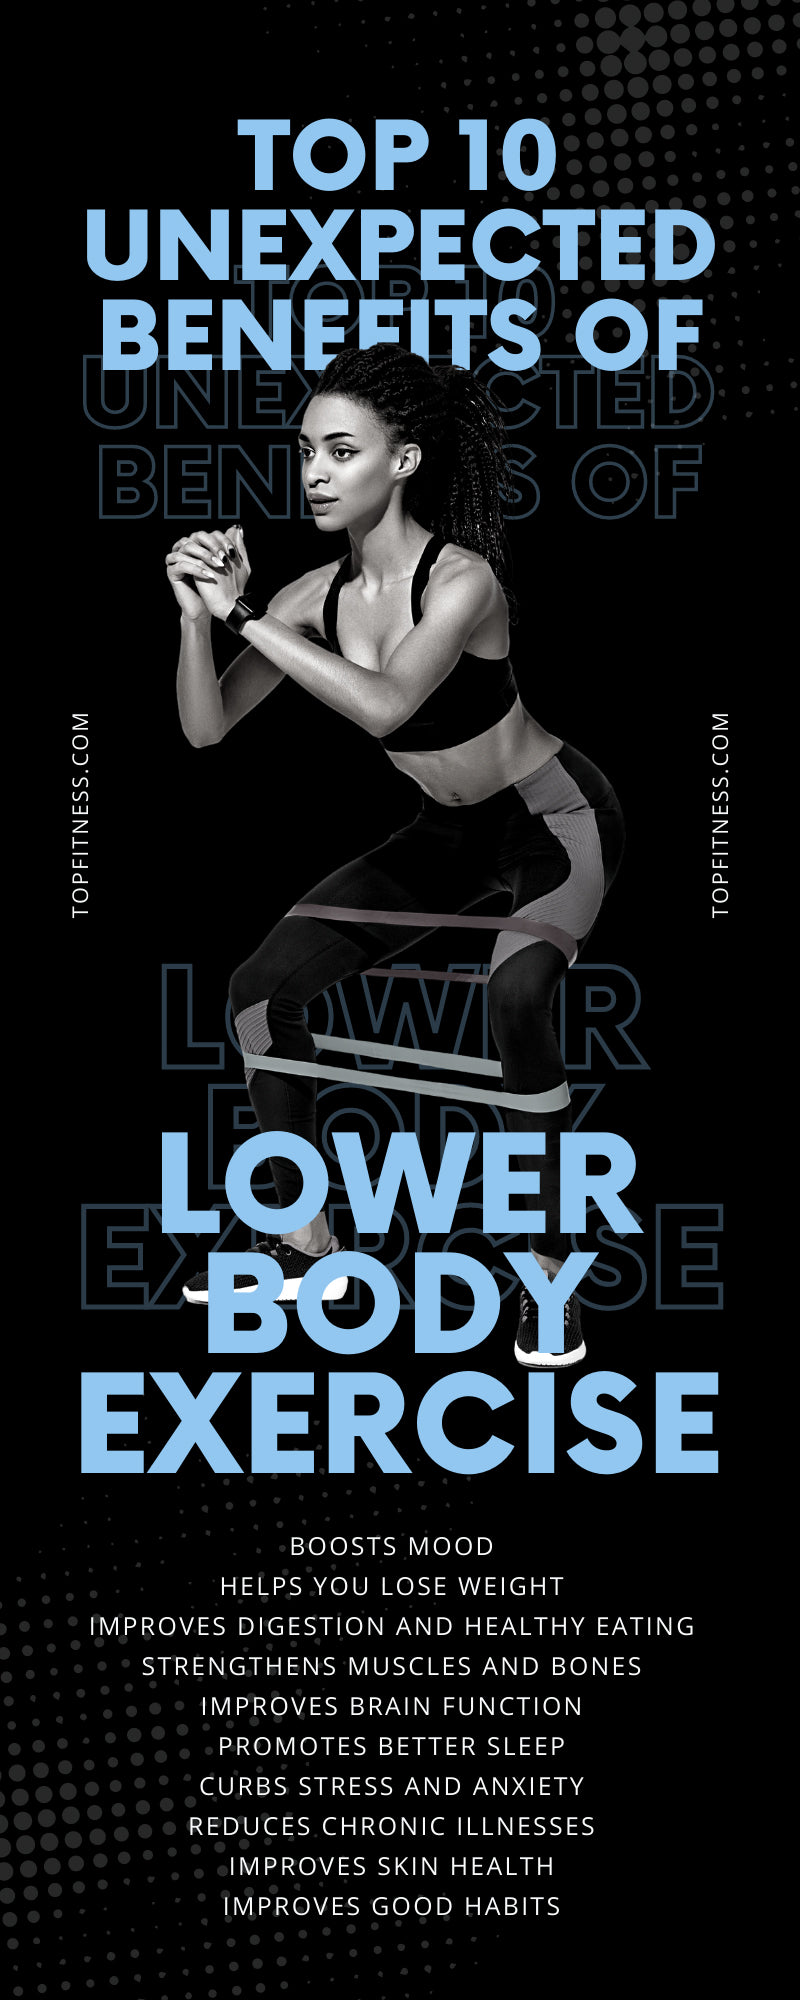 Top 10 Unexpected Benefits of Lower Body Exercise